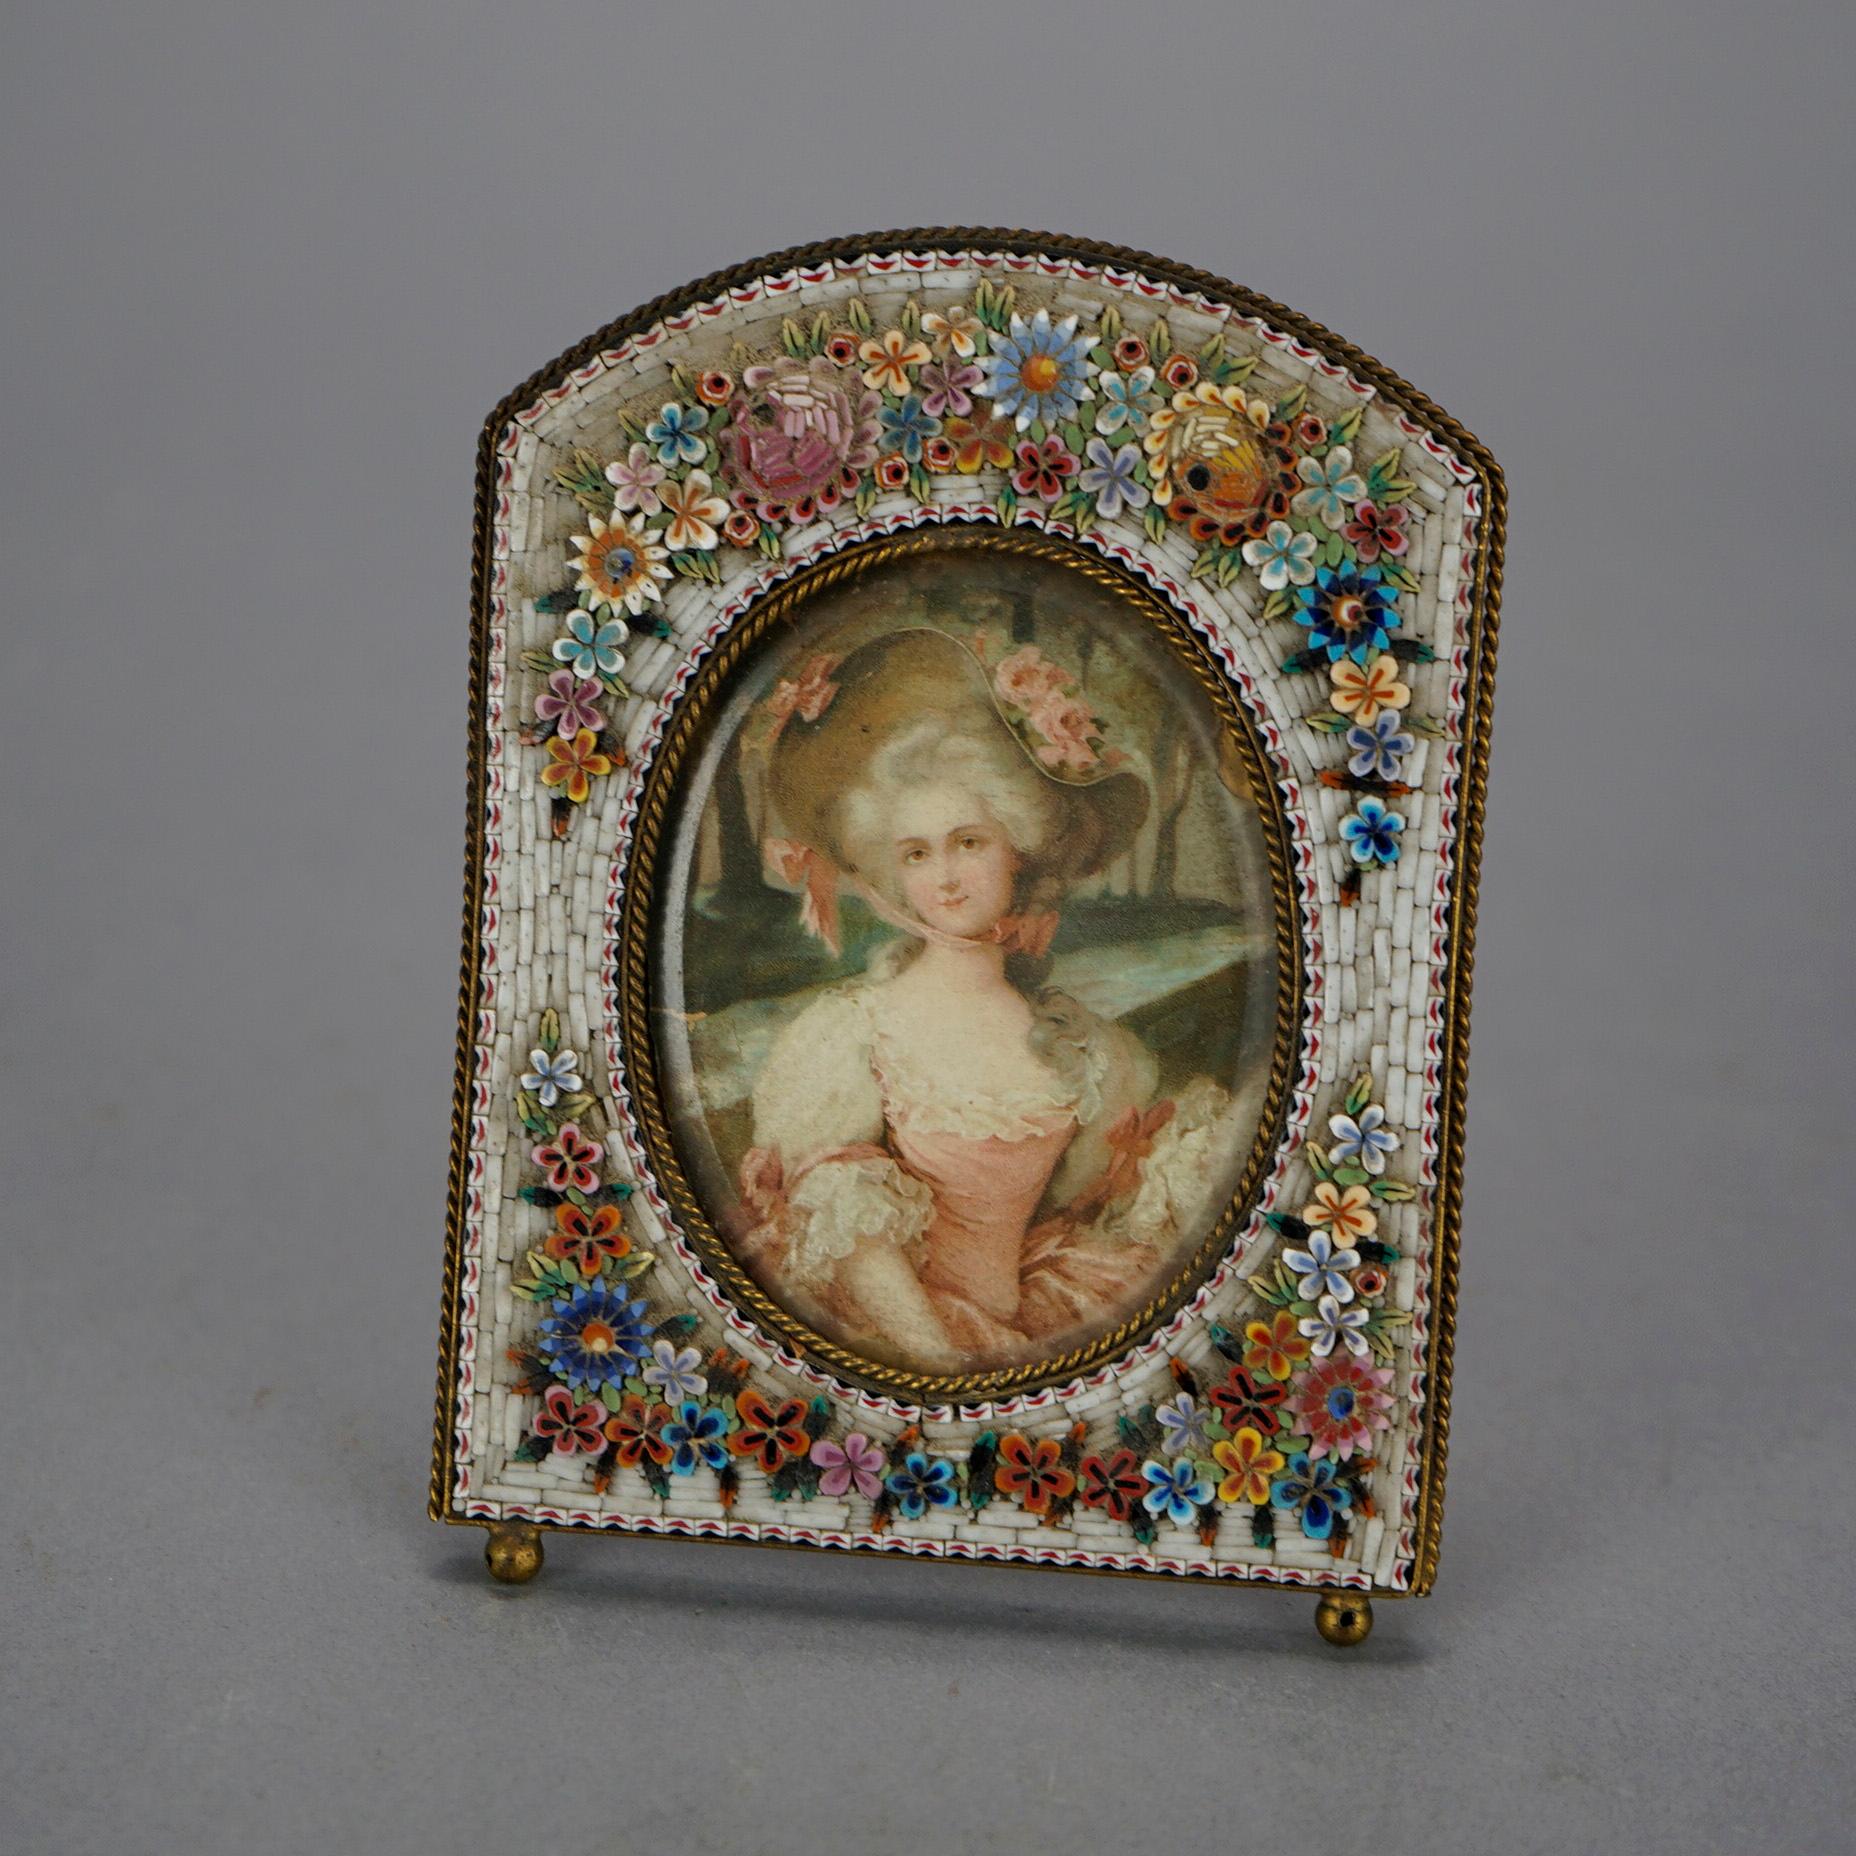 An antique picture frame offers stone micro mosaic design with flowers, c1890

Measures- 4.25''H x 3.5''W x 3.25''D.